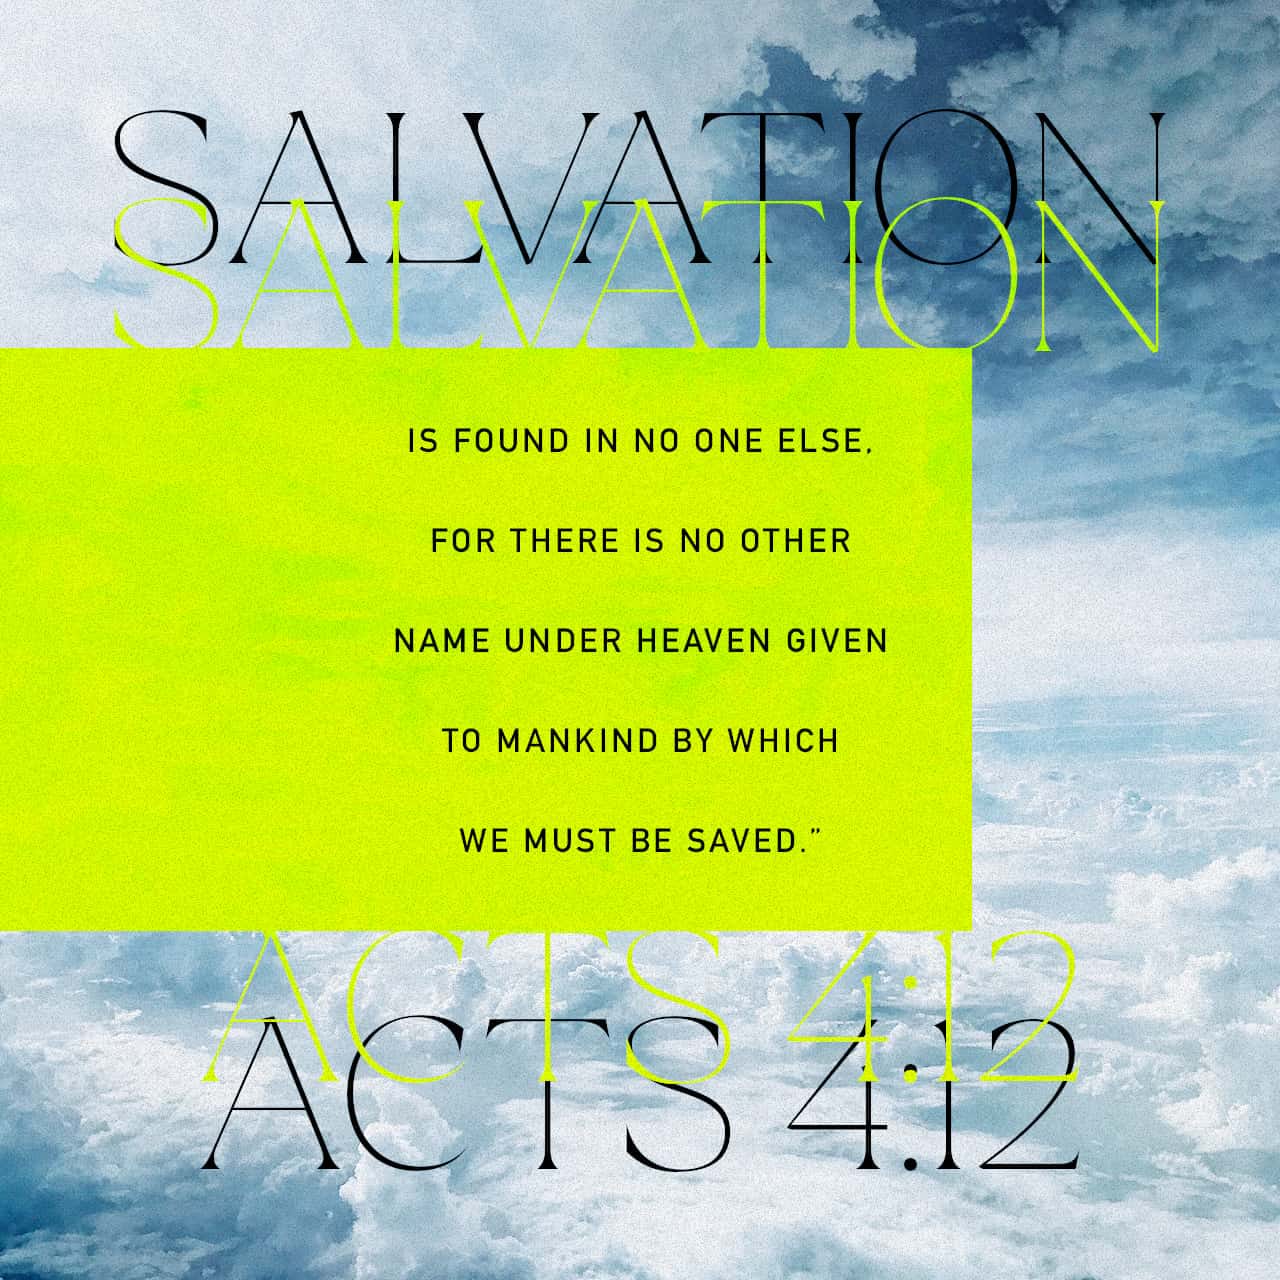 Acts 4 12 There Is Salvation In No One Else God Has Given No Other Name Under Heaven By Which We Must Be Saved Neither Is There Salvation In Any Other For There